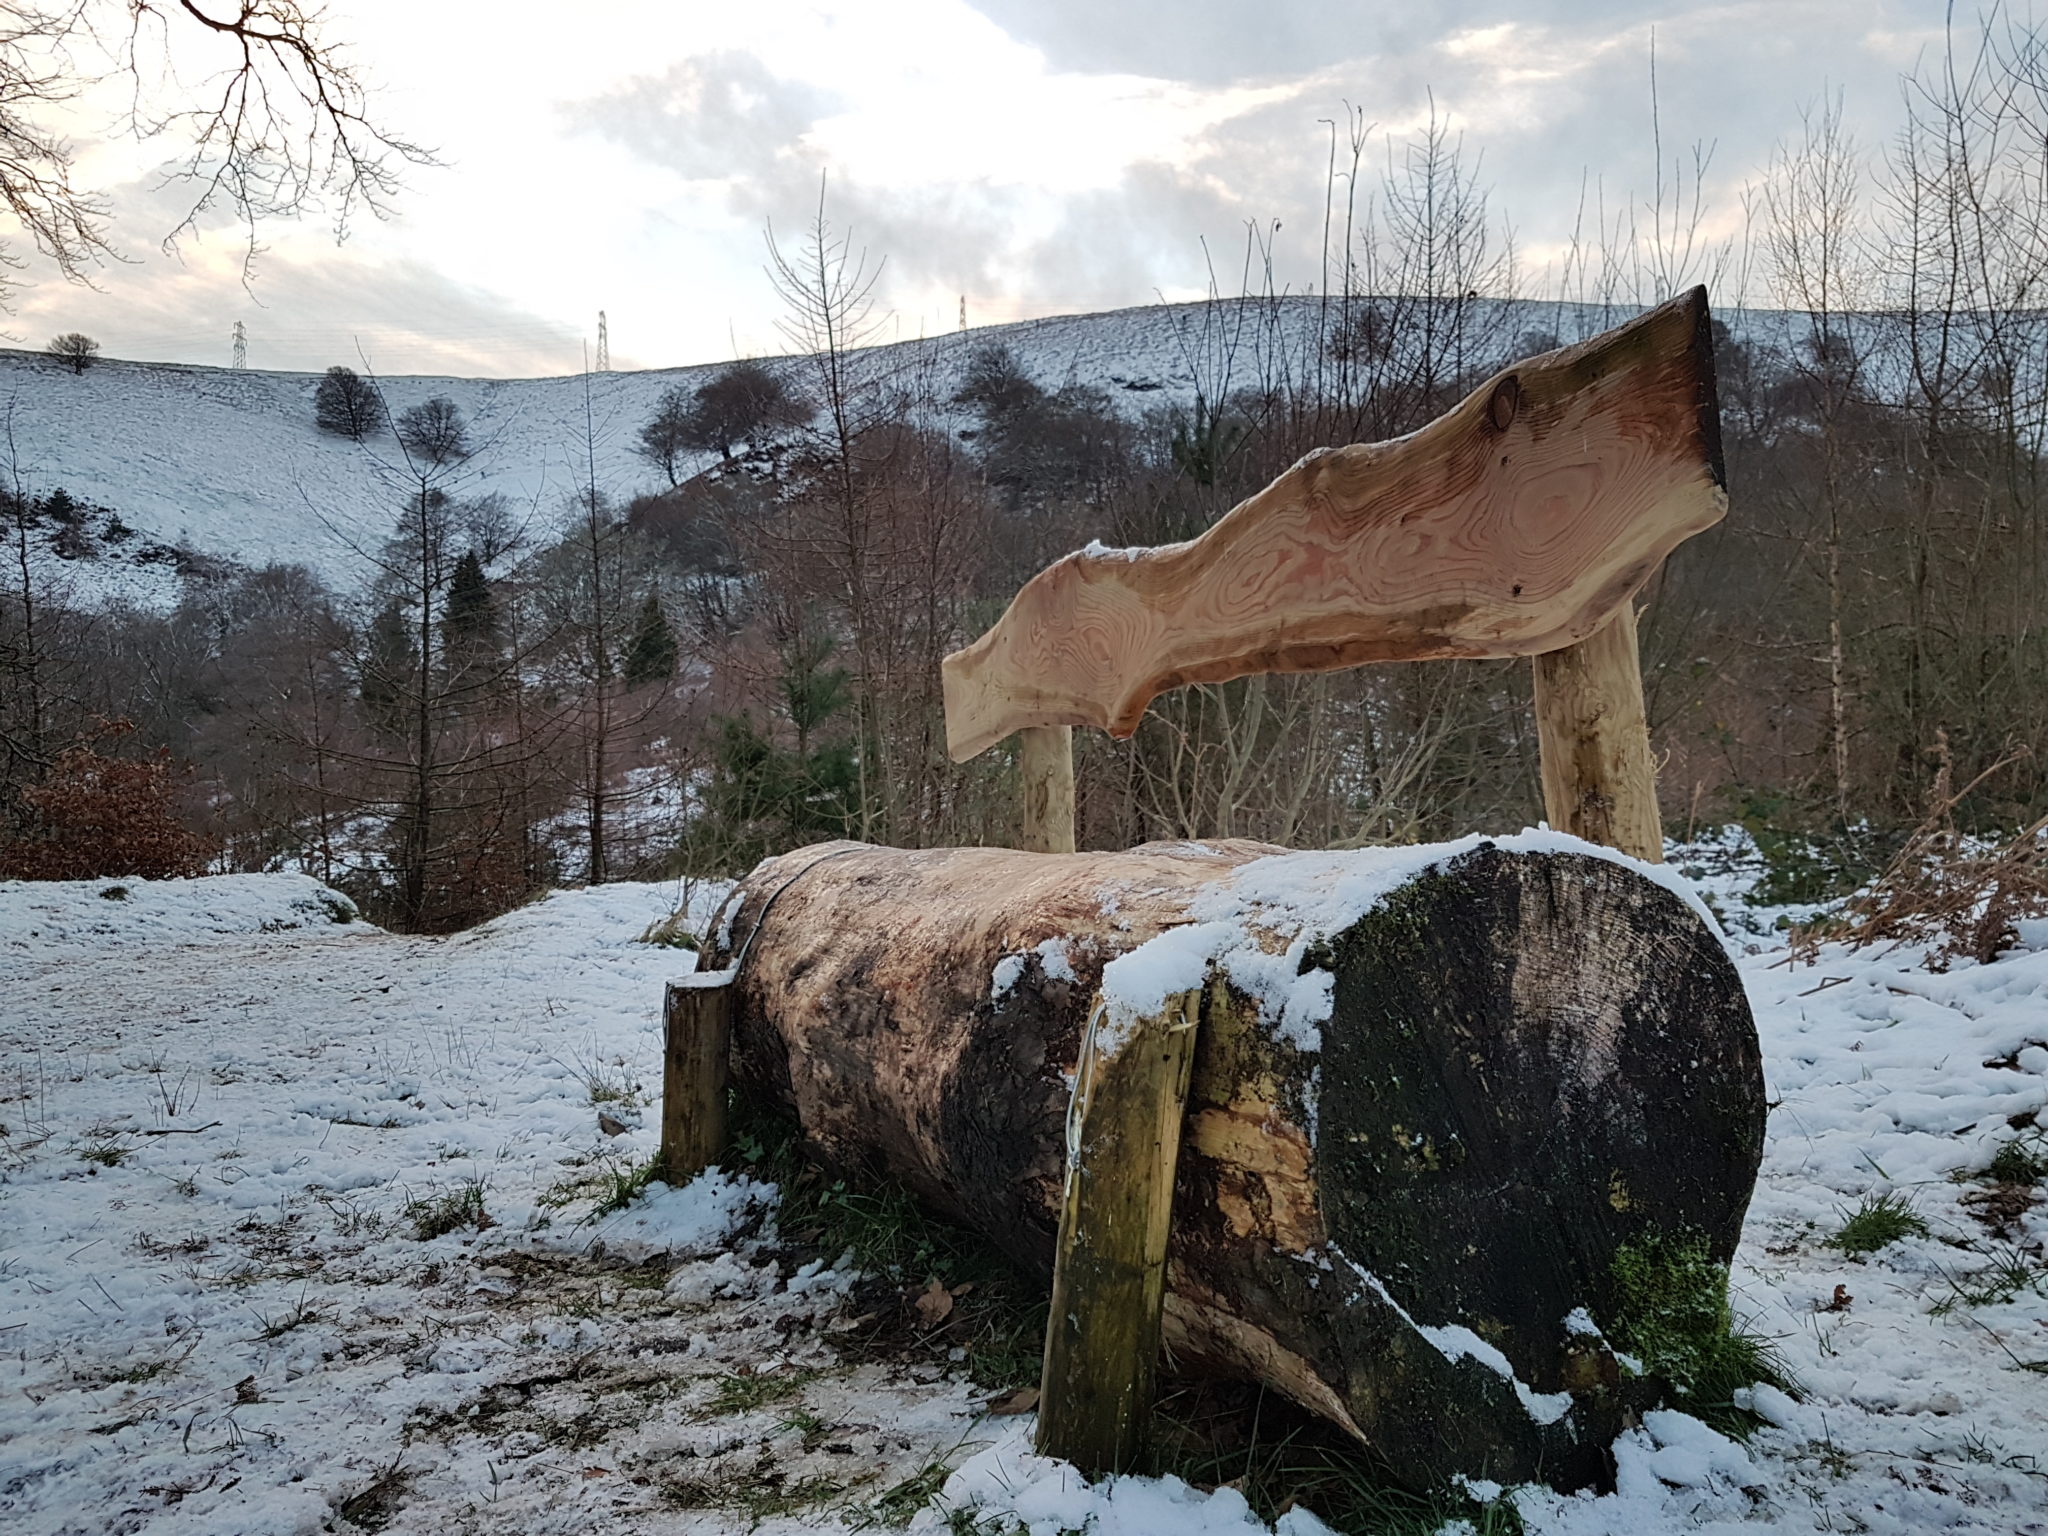 A bench to relax and enjoy the views at Blaen Bran Community Woodland in Upper Cwmbran